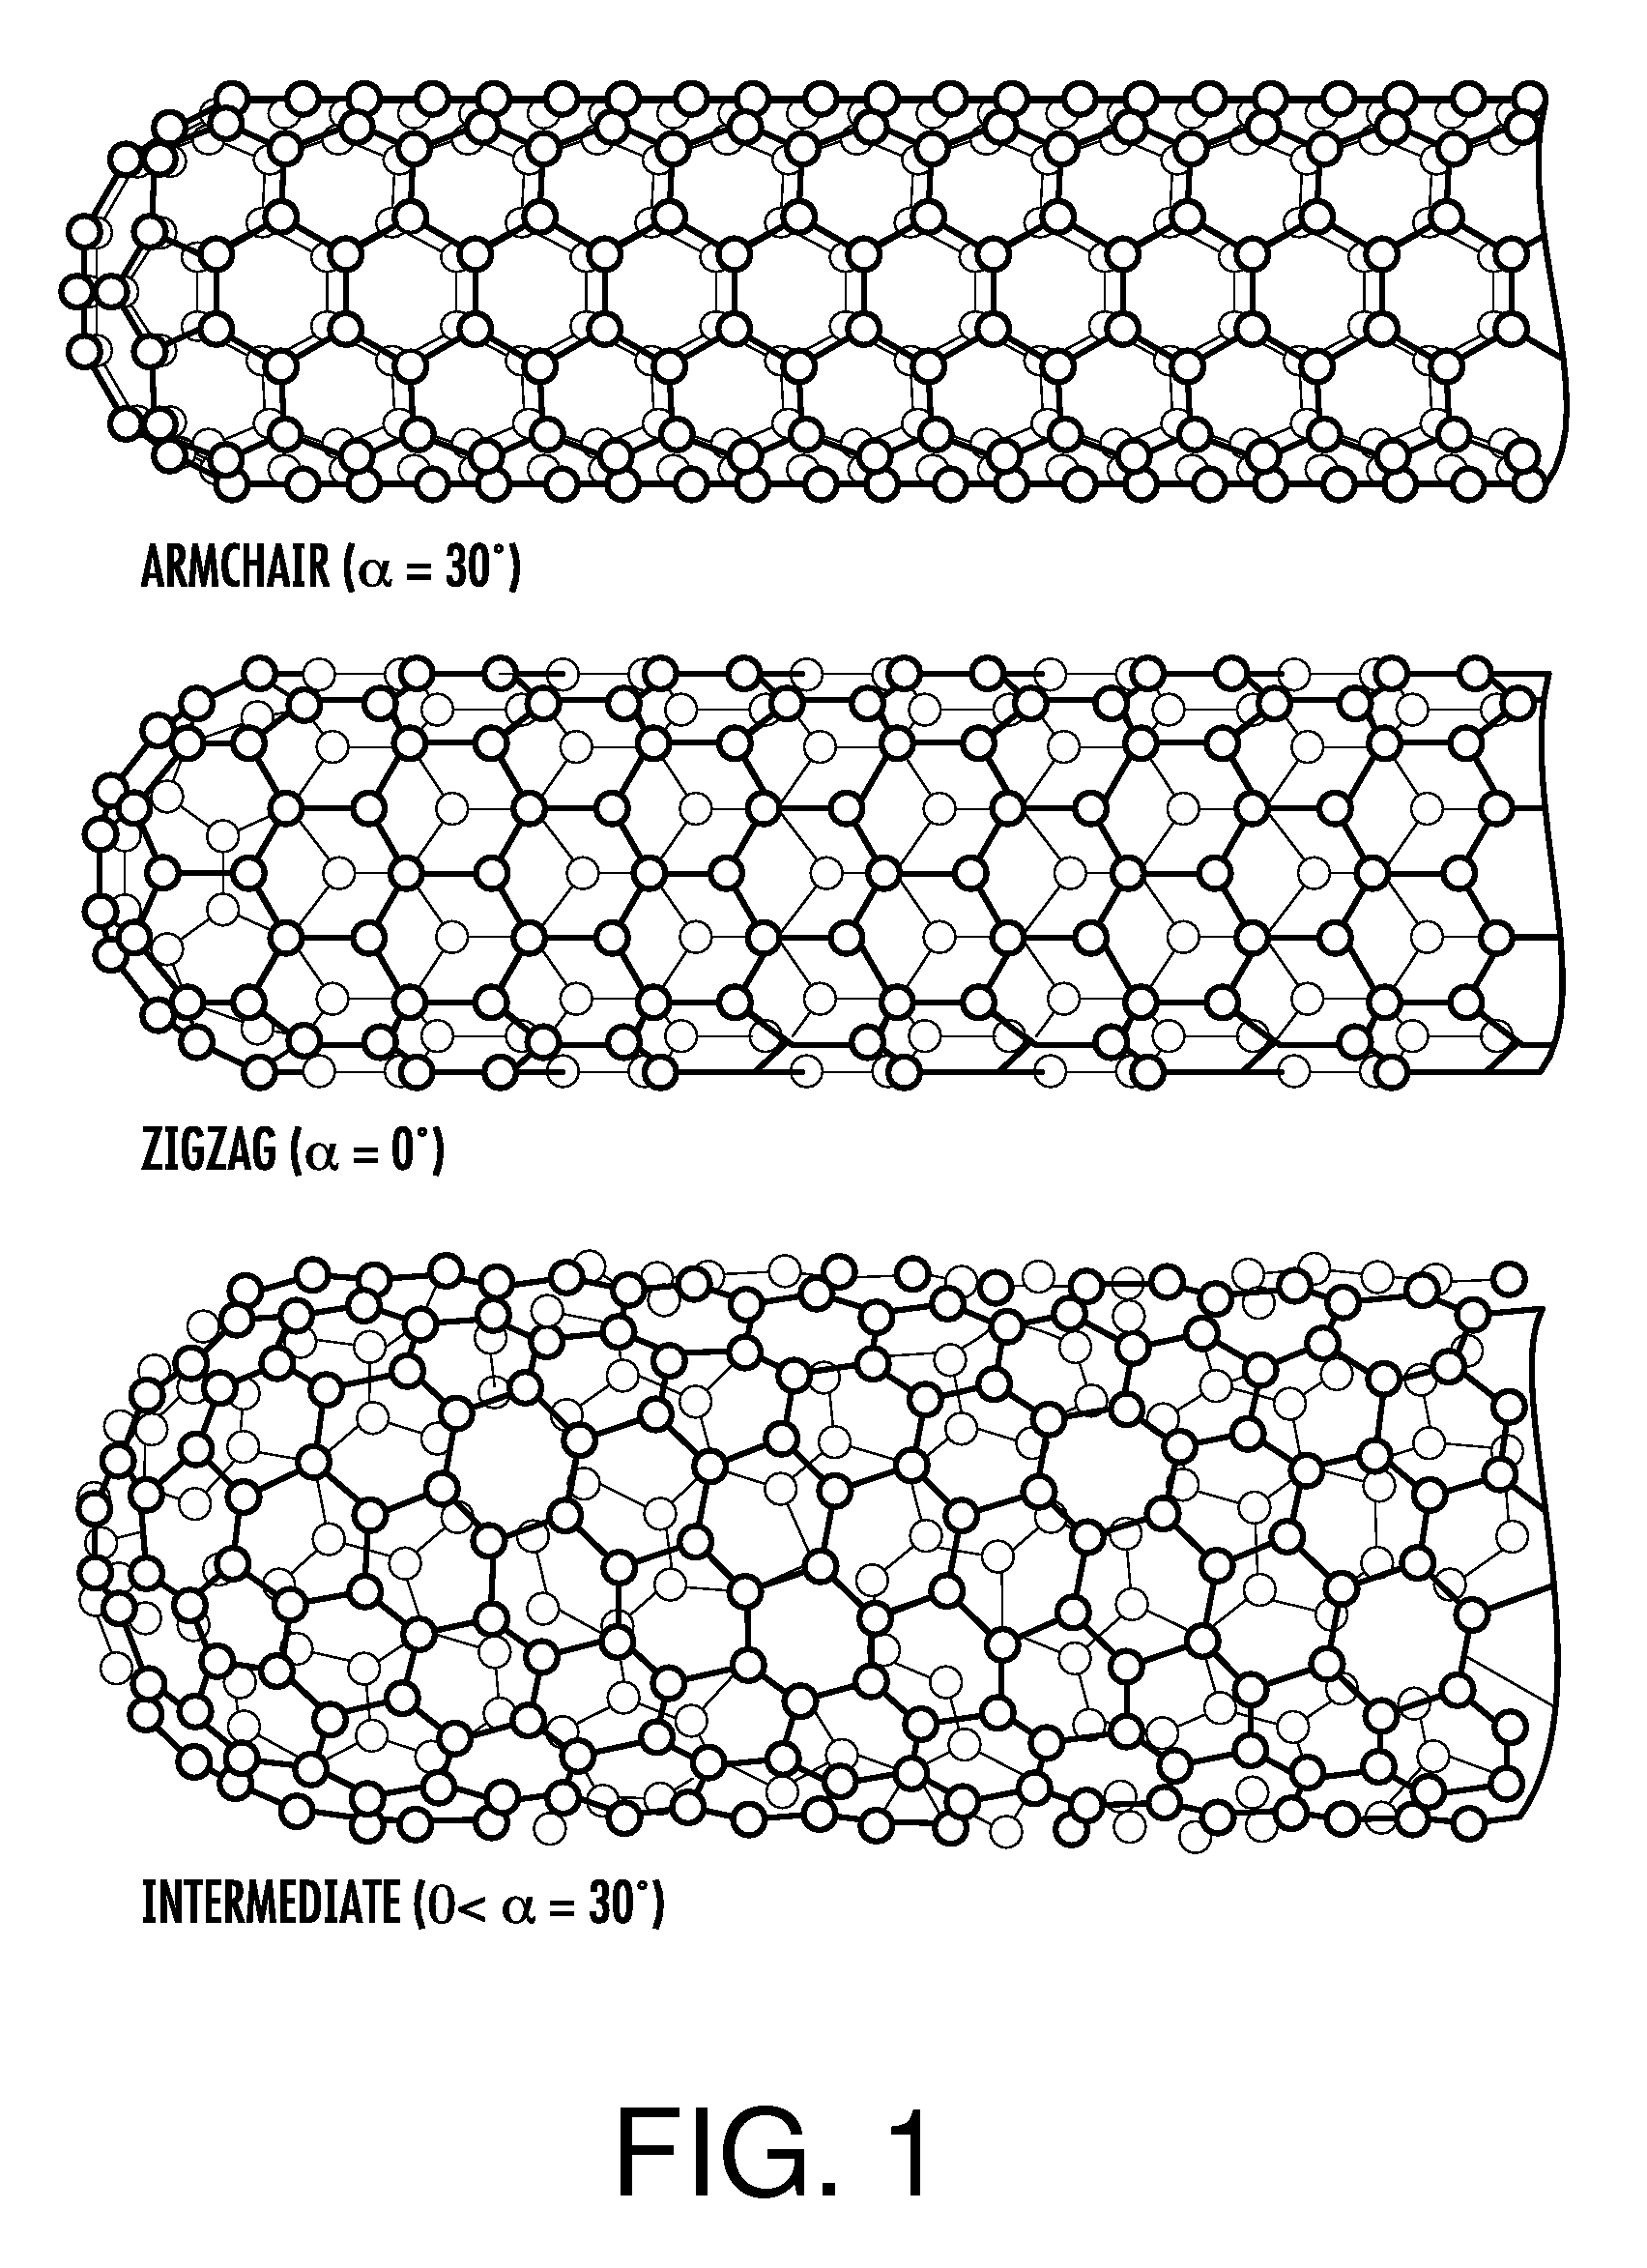 Nacelles and nacelle components containing nanoreinforced carbon fiber composite material